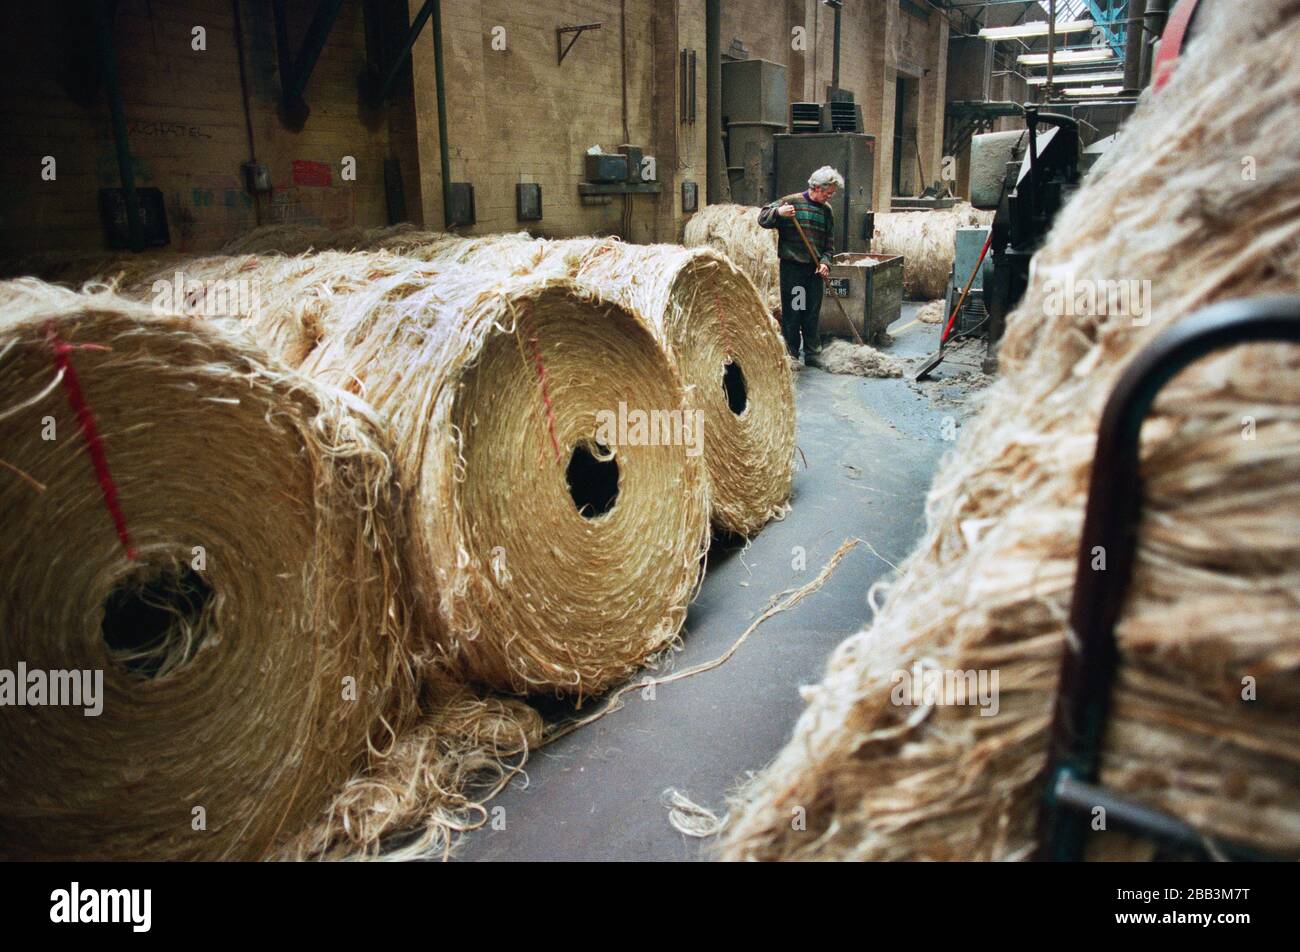 A worker sweeping the factory floor at Tay Spinners mill in Dundee, Scotland. This factory was the last jute spinning mill in Europe when it closed for the final time in 1998. The city of Dundee had been famous throughout history for the three 'Js' - jute, jam and journalism. Stock Photo